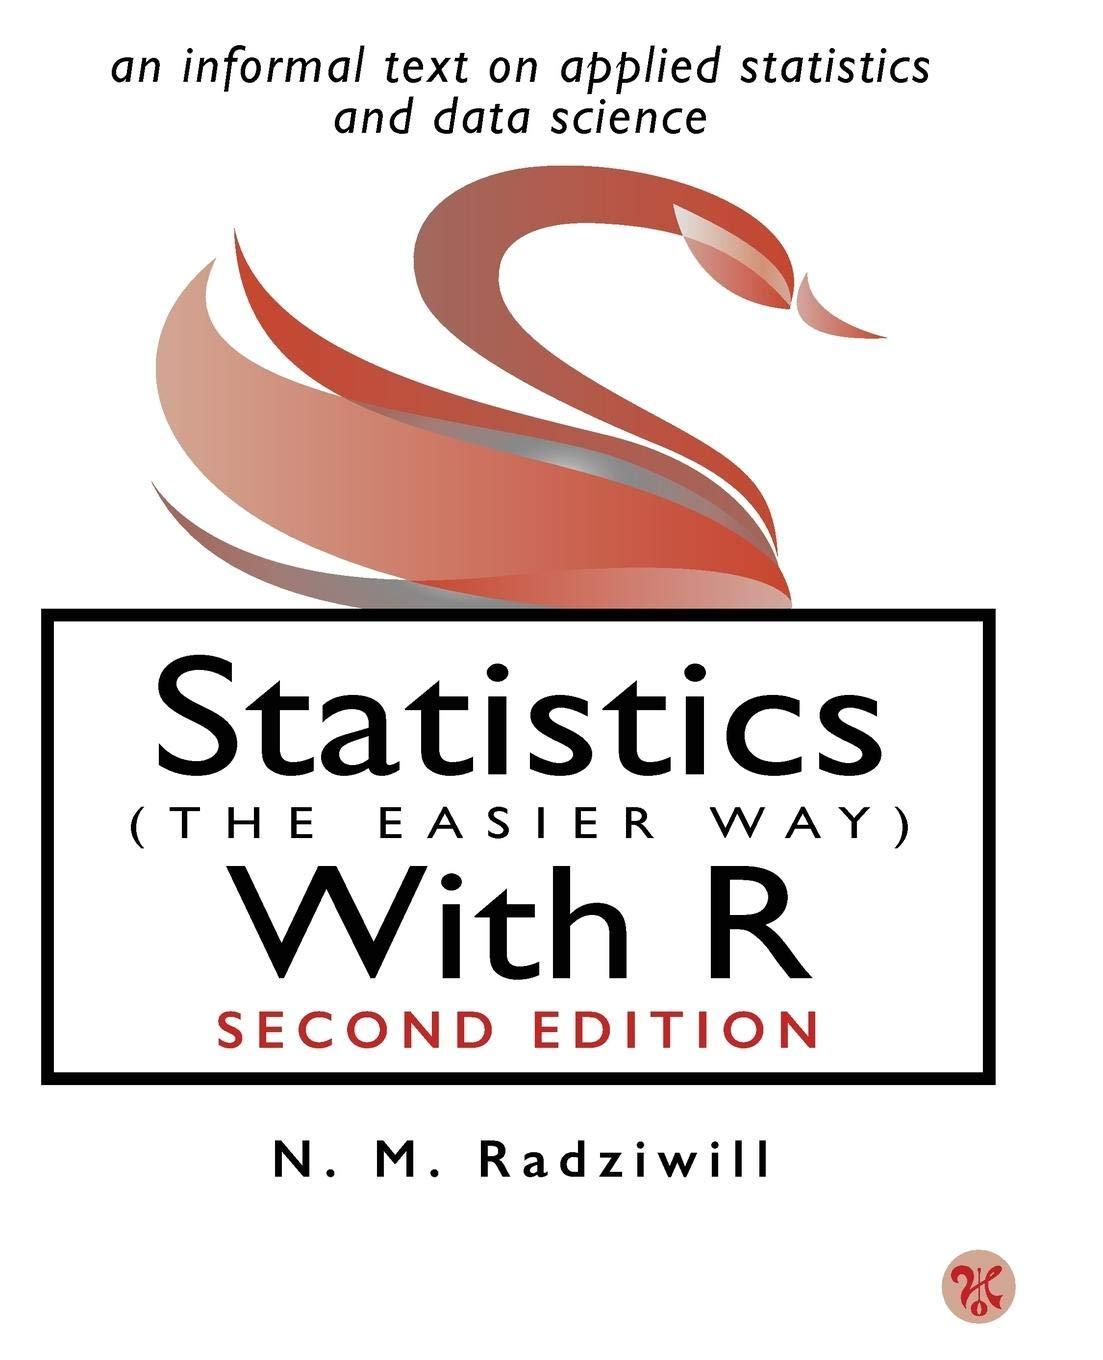 statistics the easier way with r 2nd edition n m radziwill 0996916059, 9780996916059